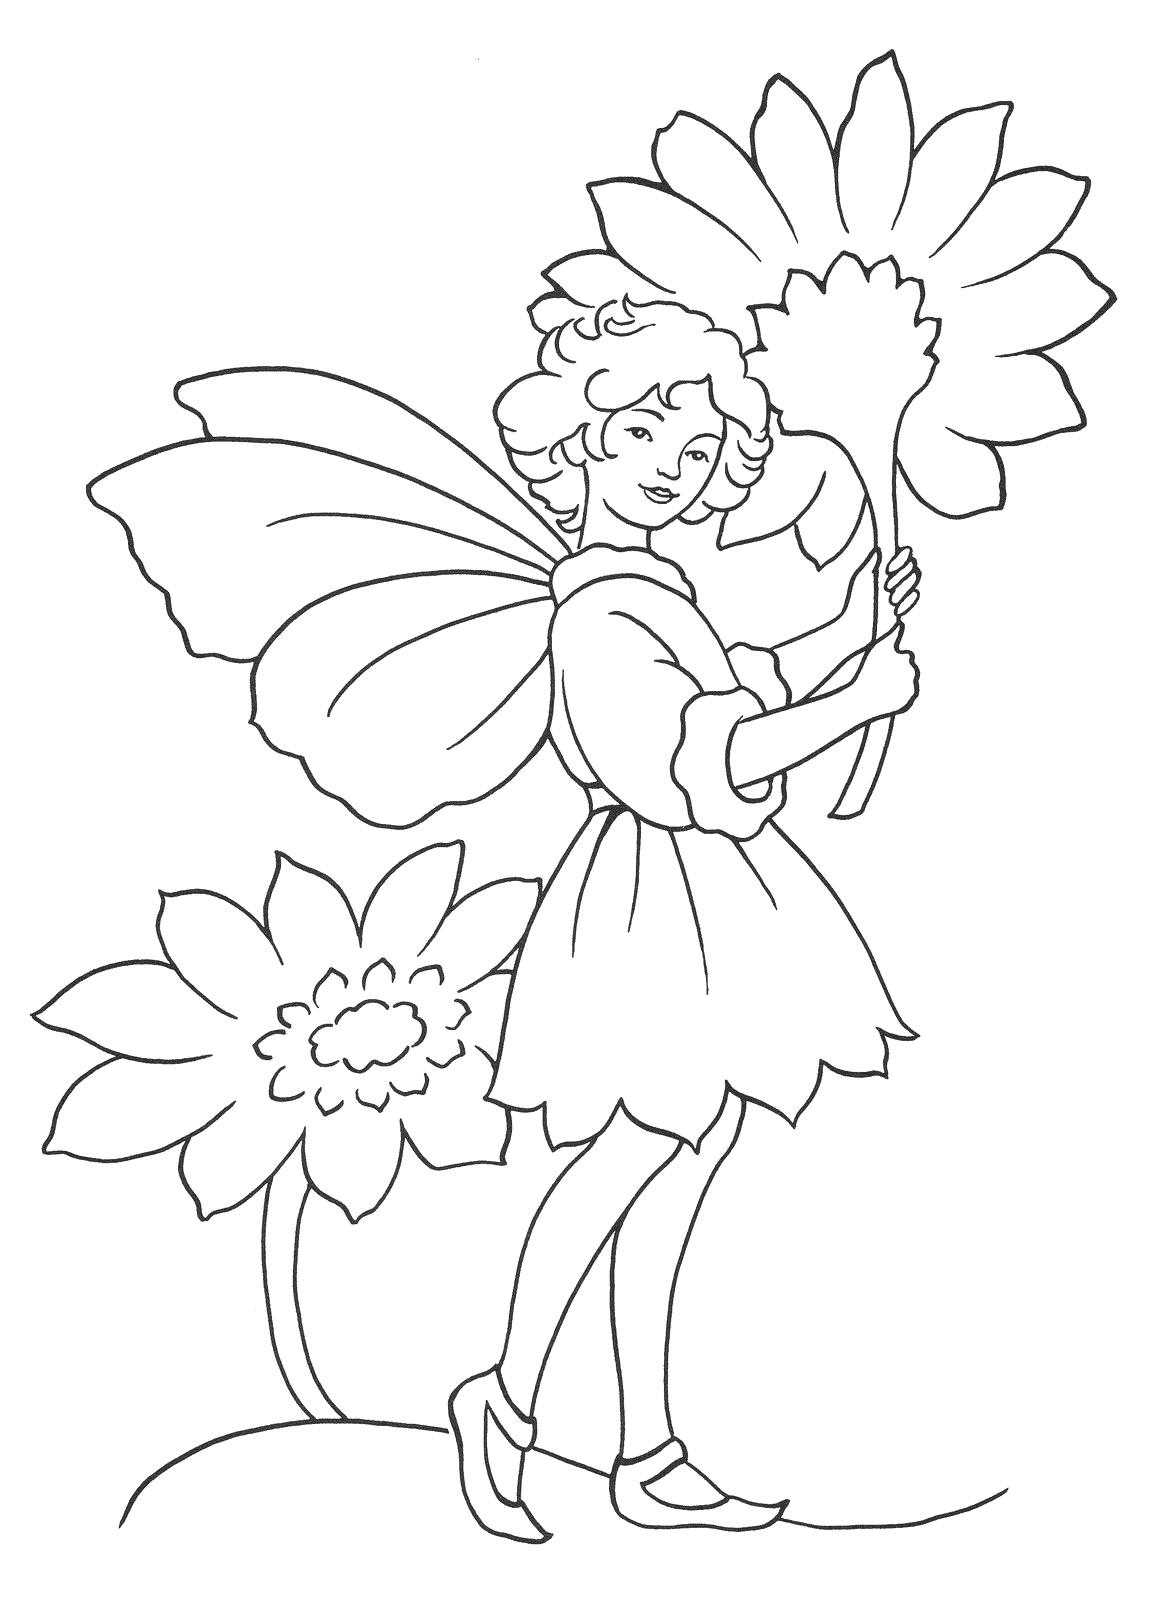 Coloring page - Fairy with Flower